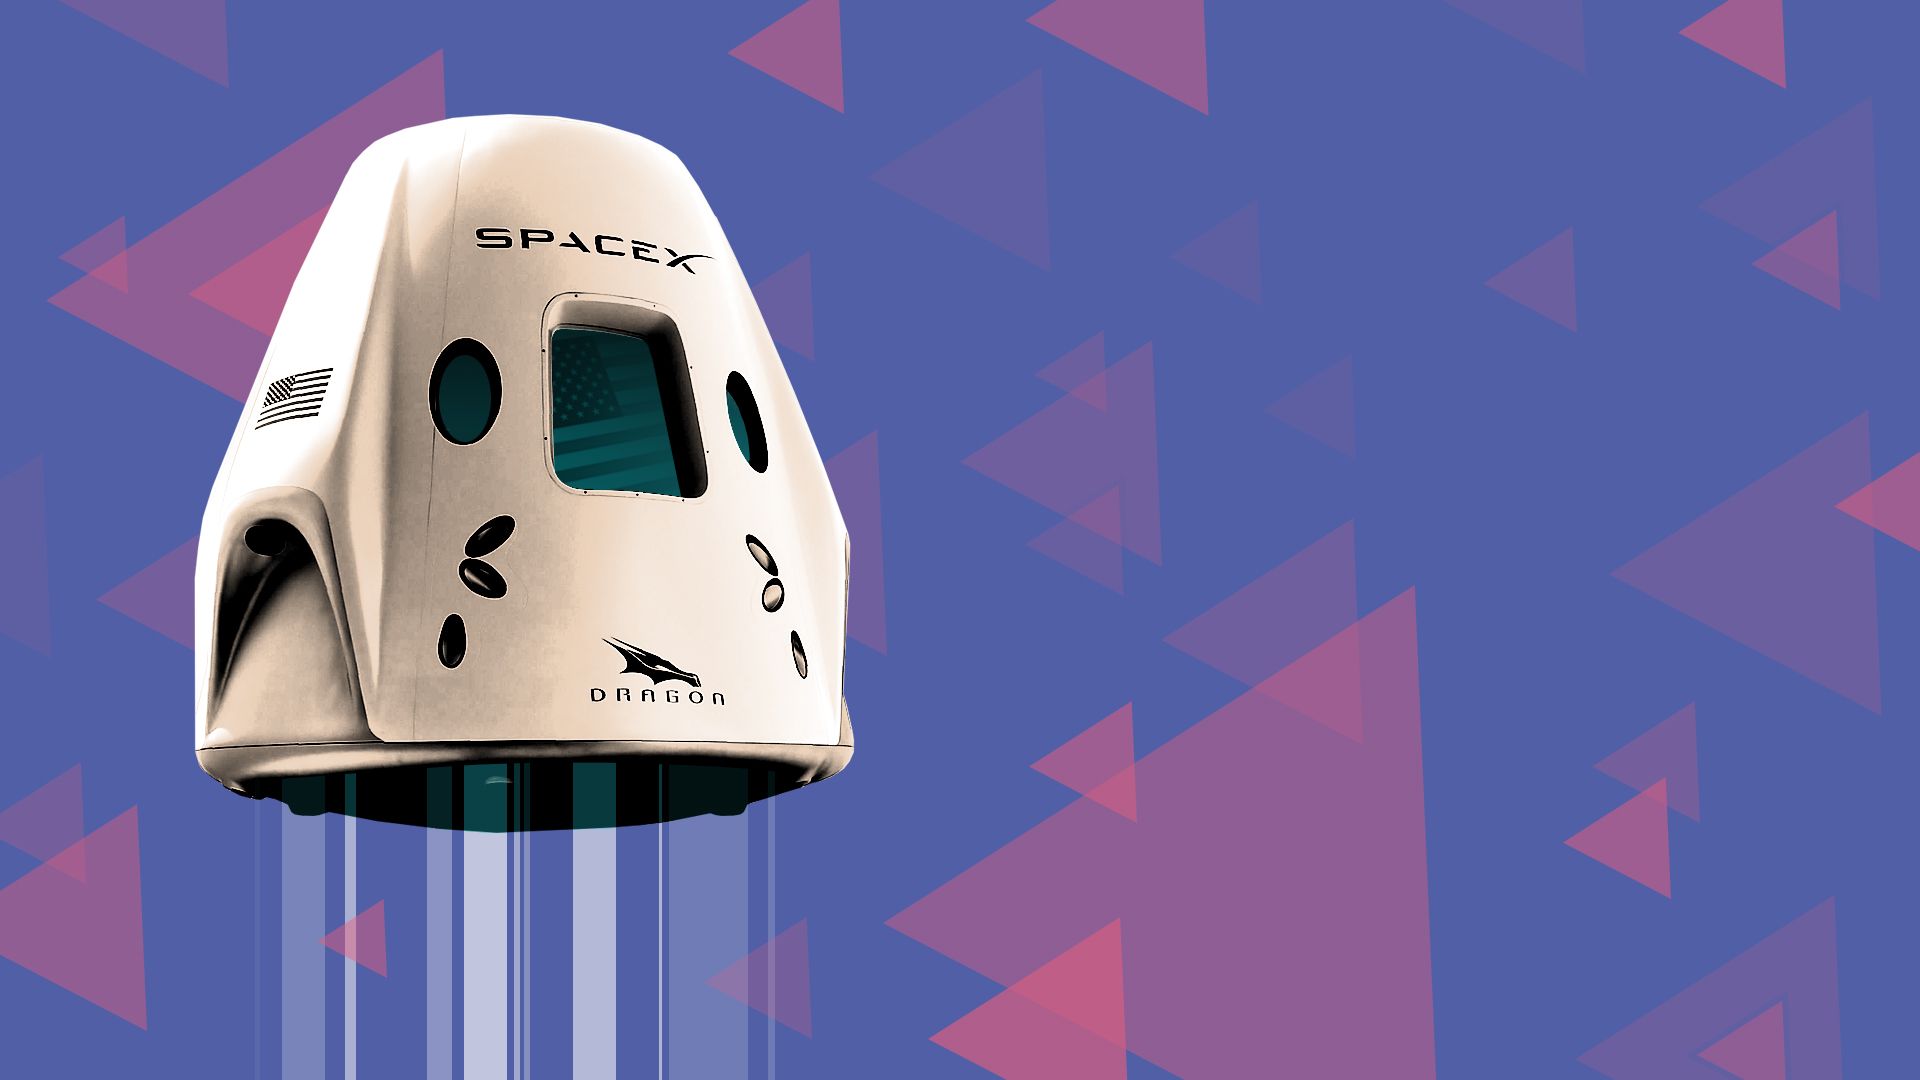 Illustration of a SpaceX Crew Dragon spacecraft.